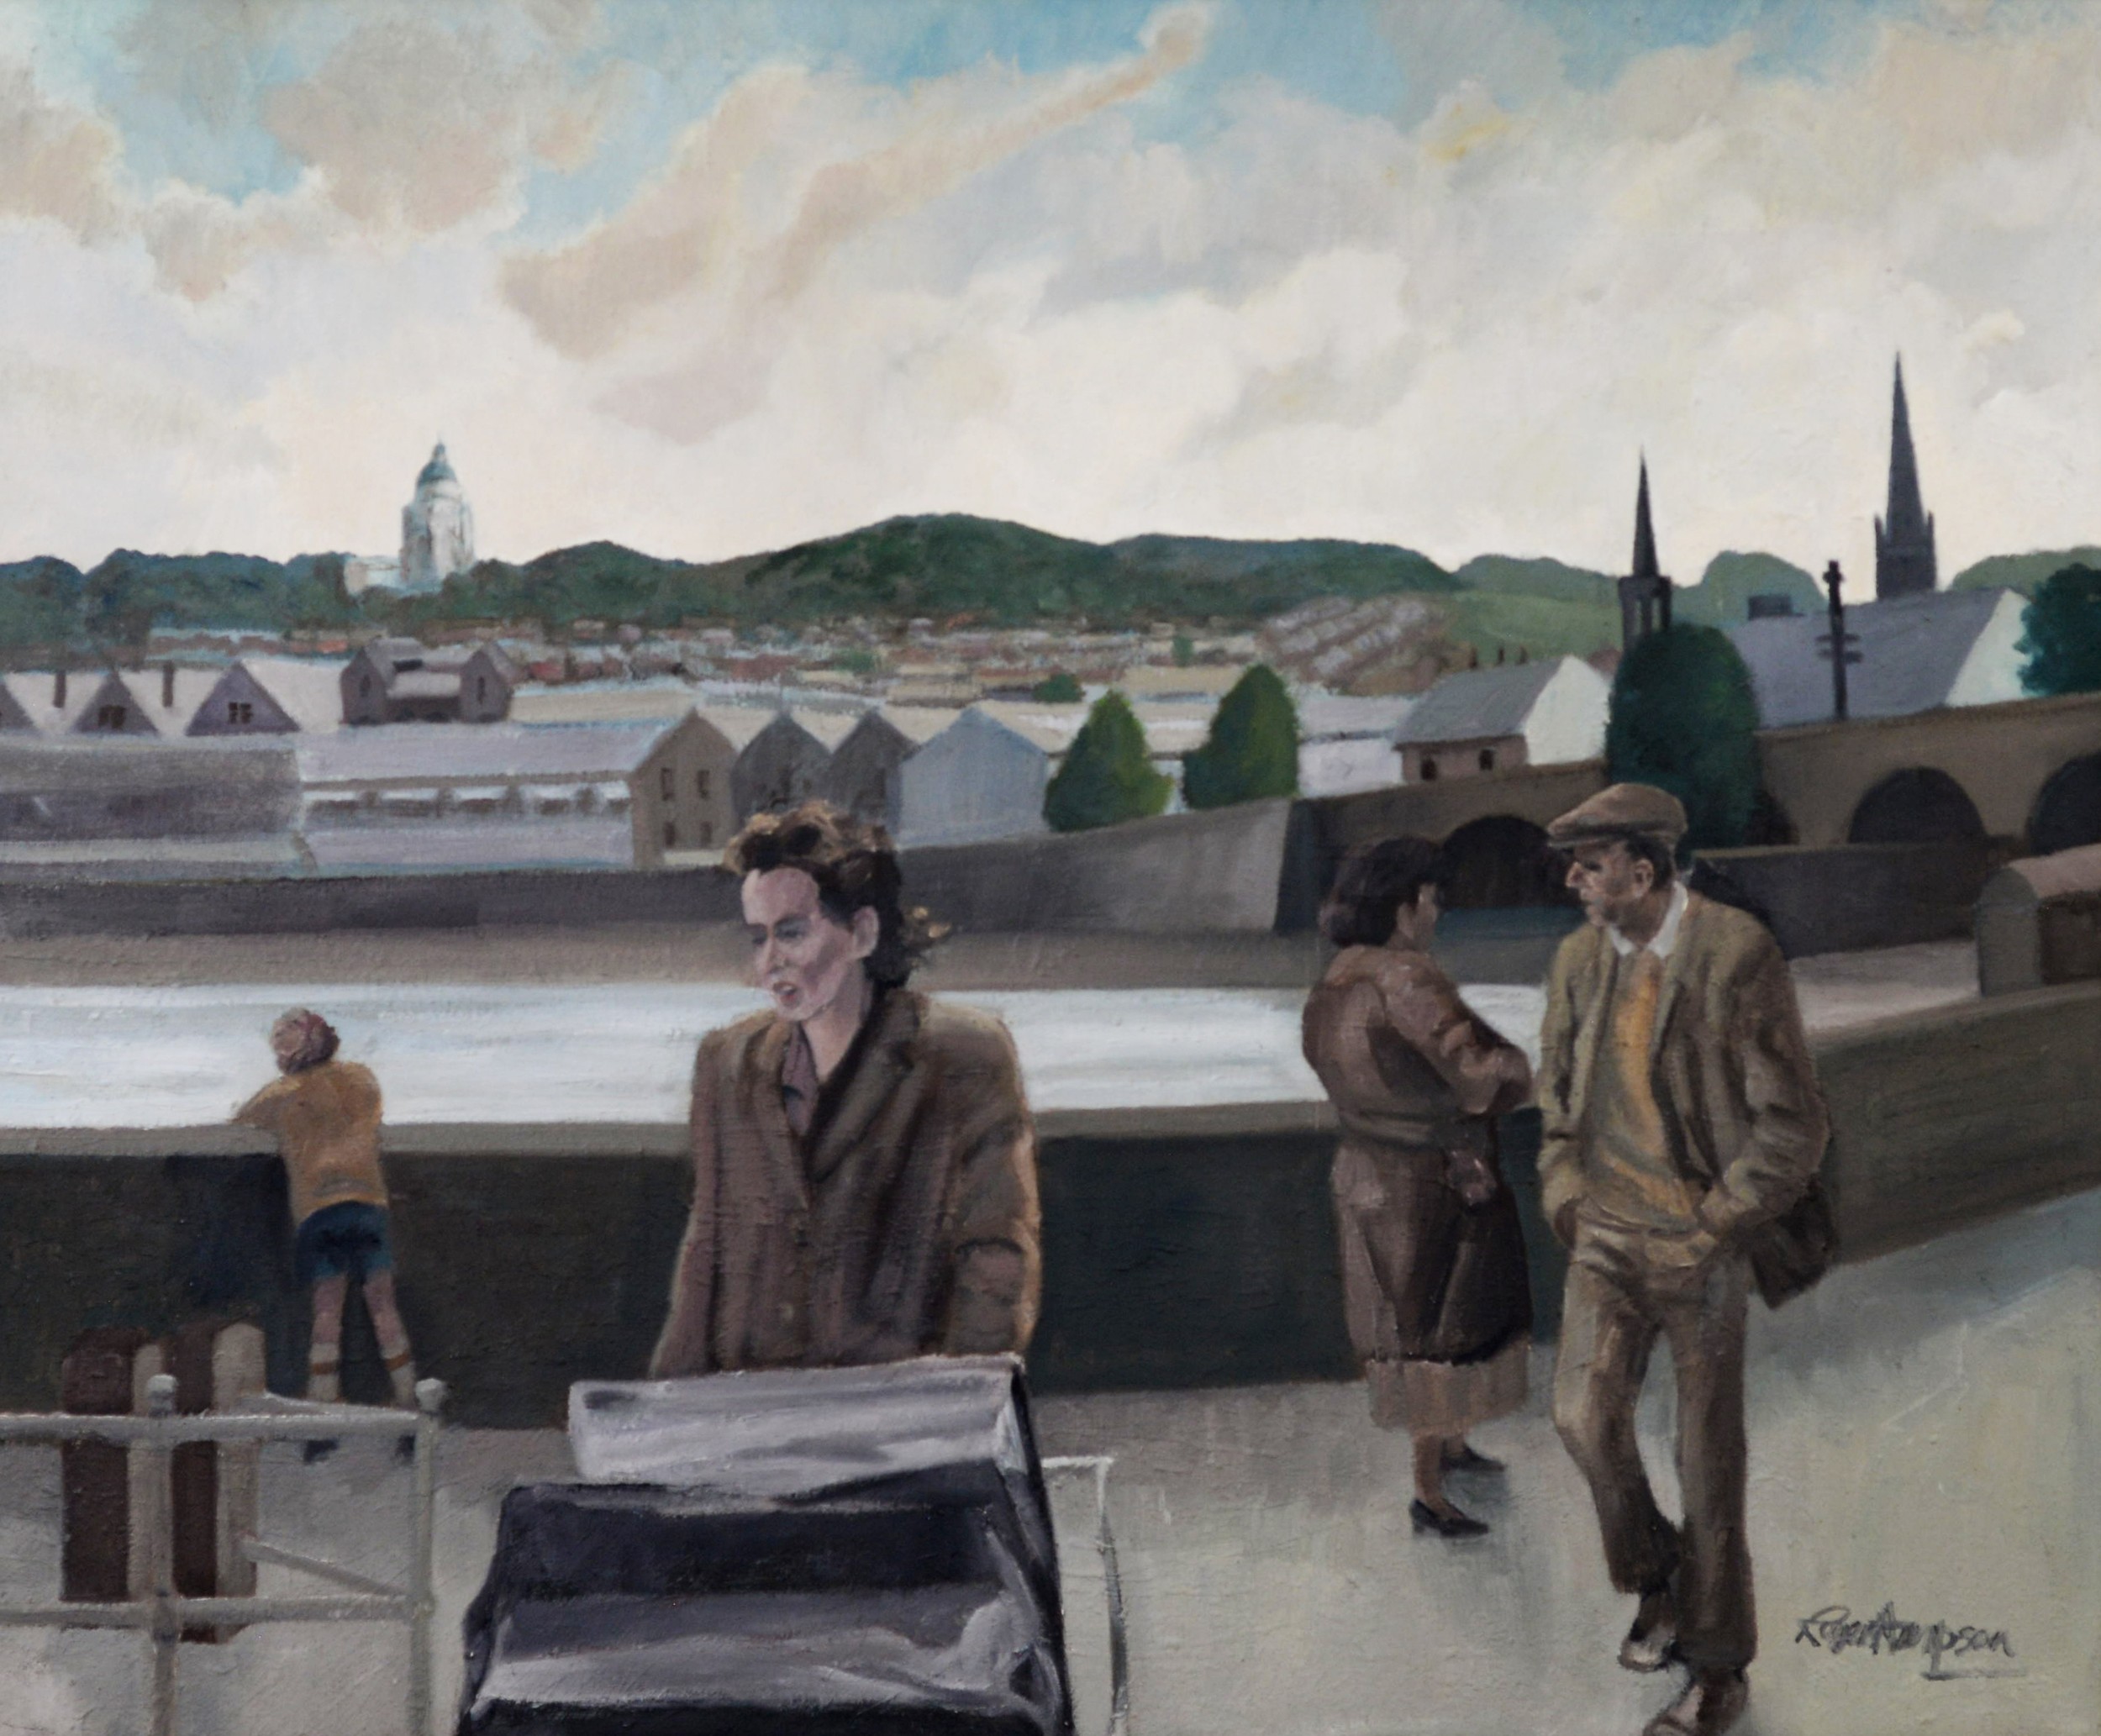 ROGER HAMPSON (1925 - 1996) OIL PAINTING ON CANVAS Lancaster viewed over the river Lune with figures